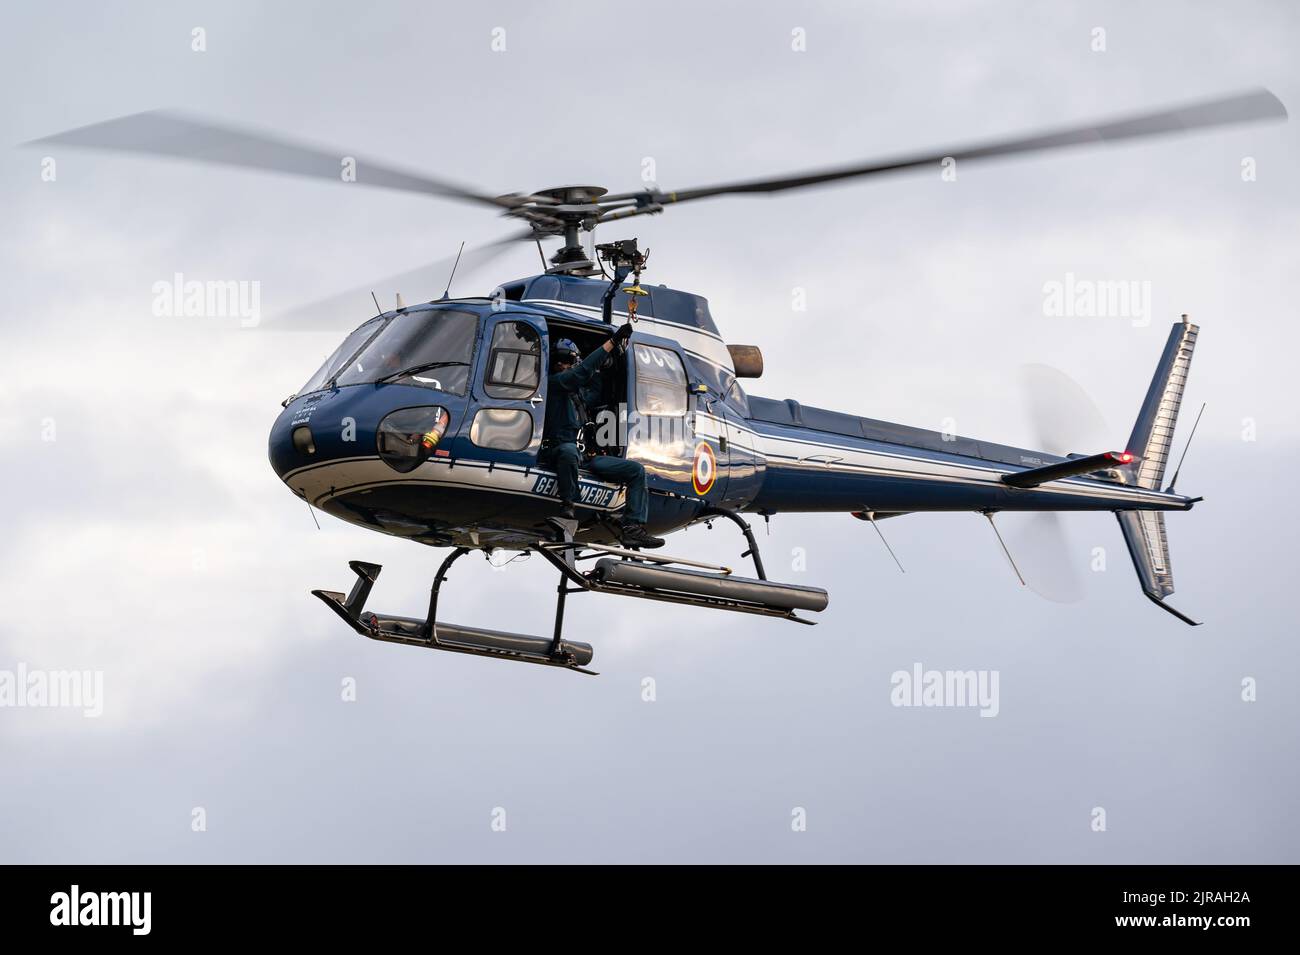 A Eurocopter AS350 Écureuil police helicopter of the French Gendarmerie Nationale. Stock Photo